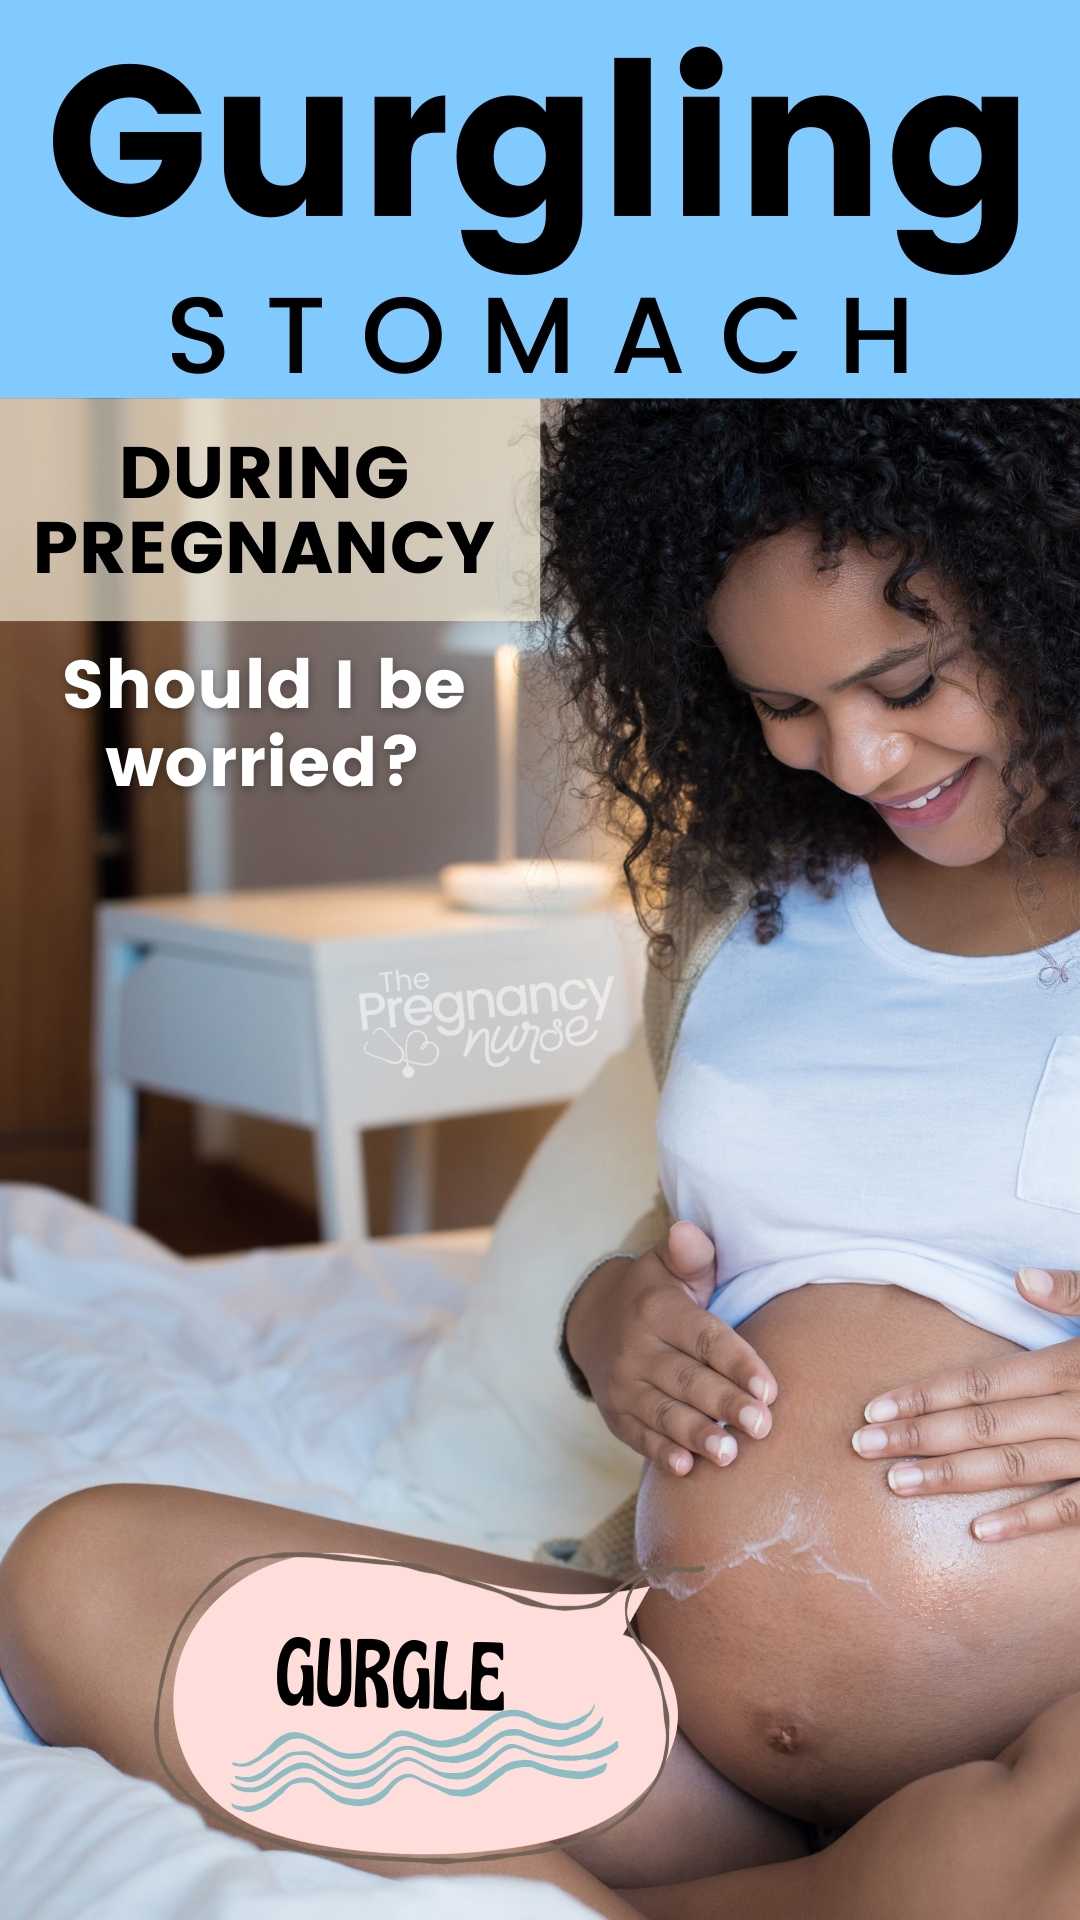 During the second trimester of your pregnancy, you may experience a gurgling stomach. This is a common occurrence and is usually nothing to worry about. Here's what causes it and how to ease the discomfort. Always consult with your health care provider if you are experiencing any concerns during your pregnancy.